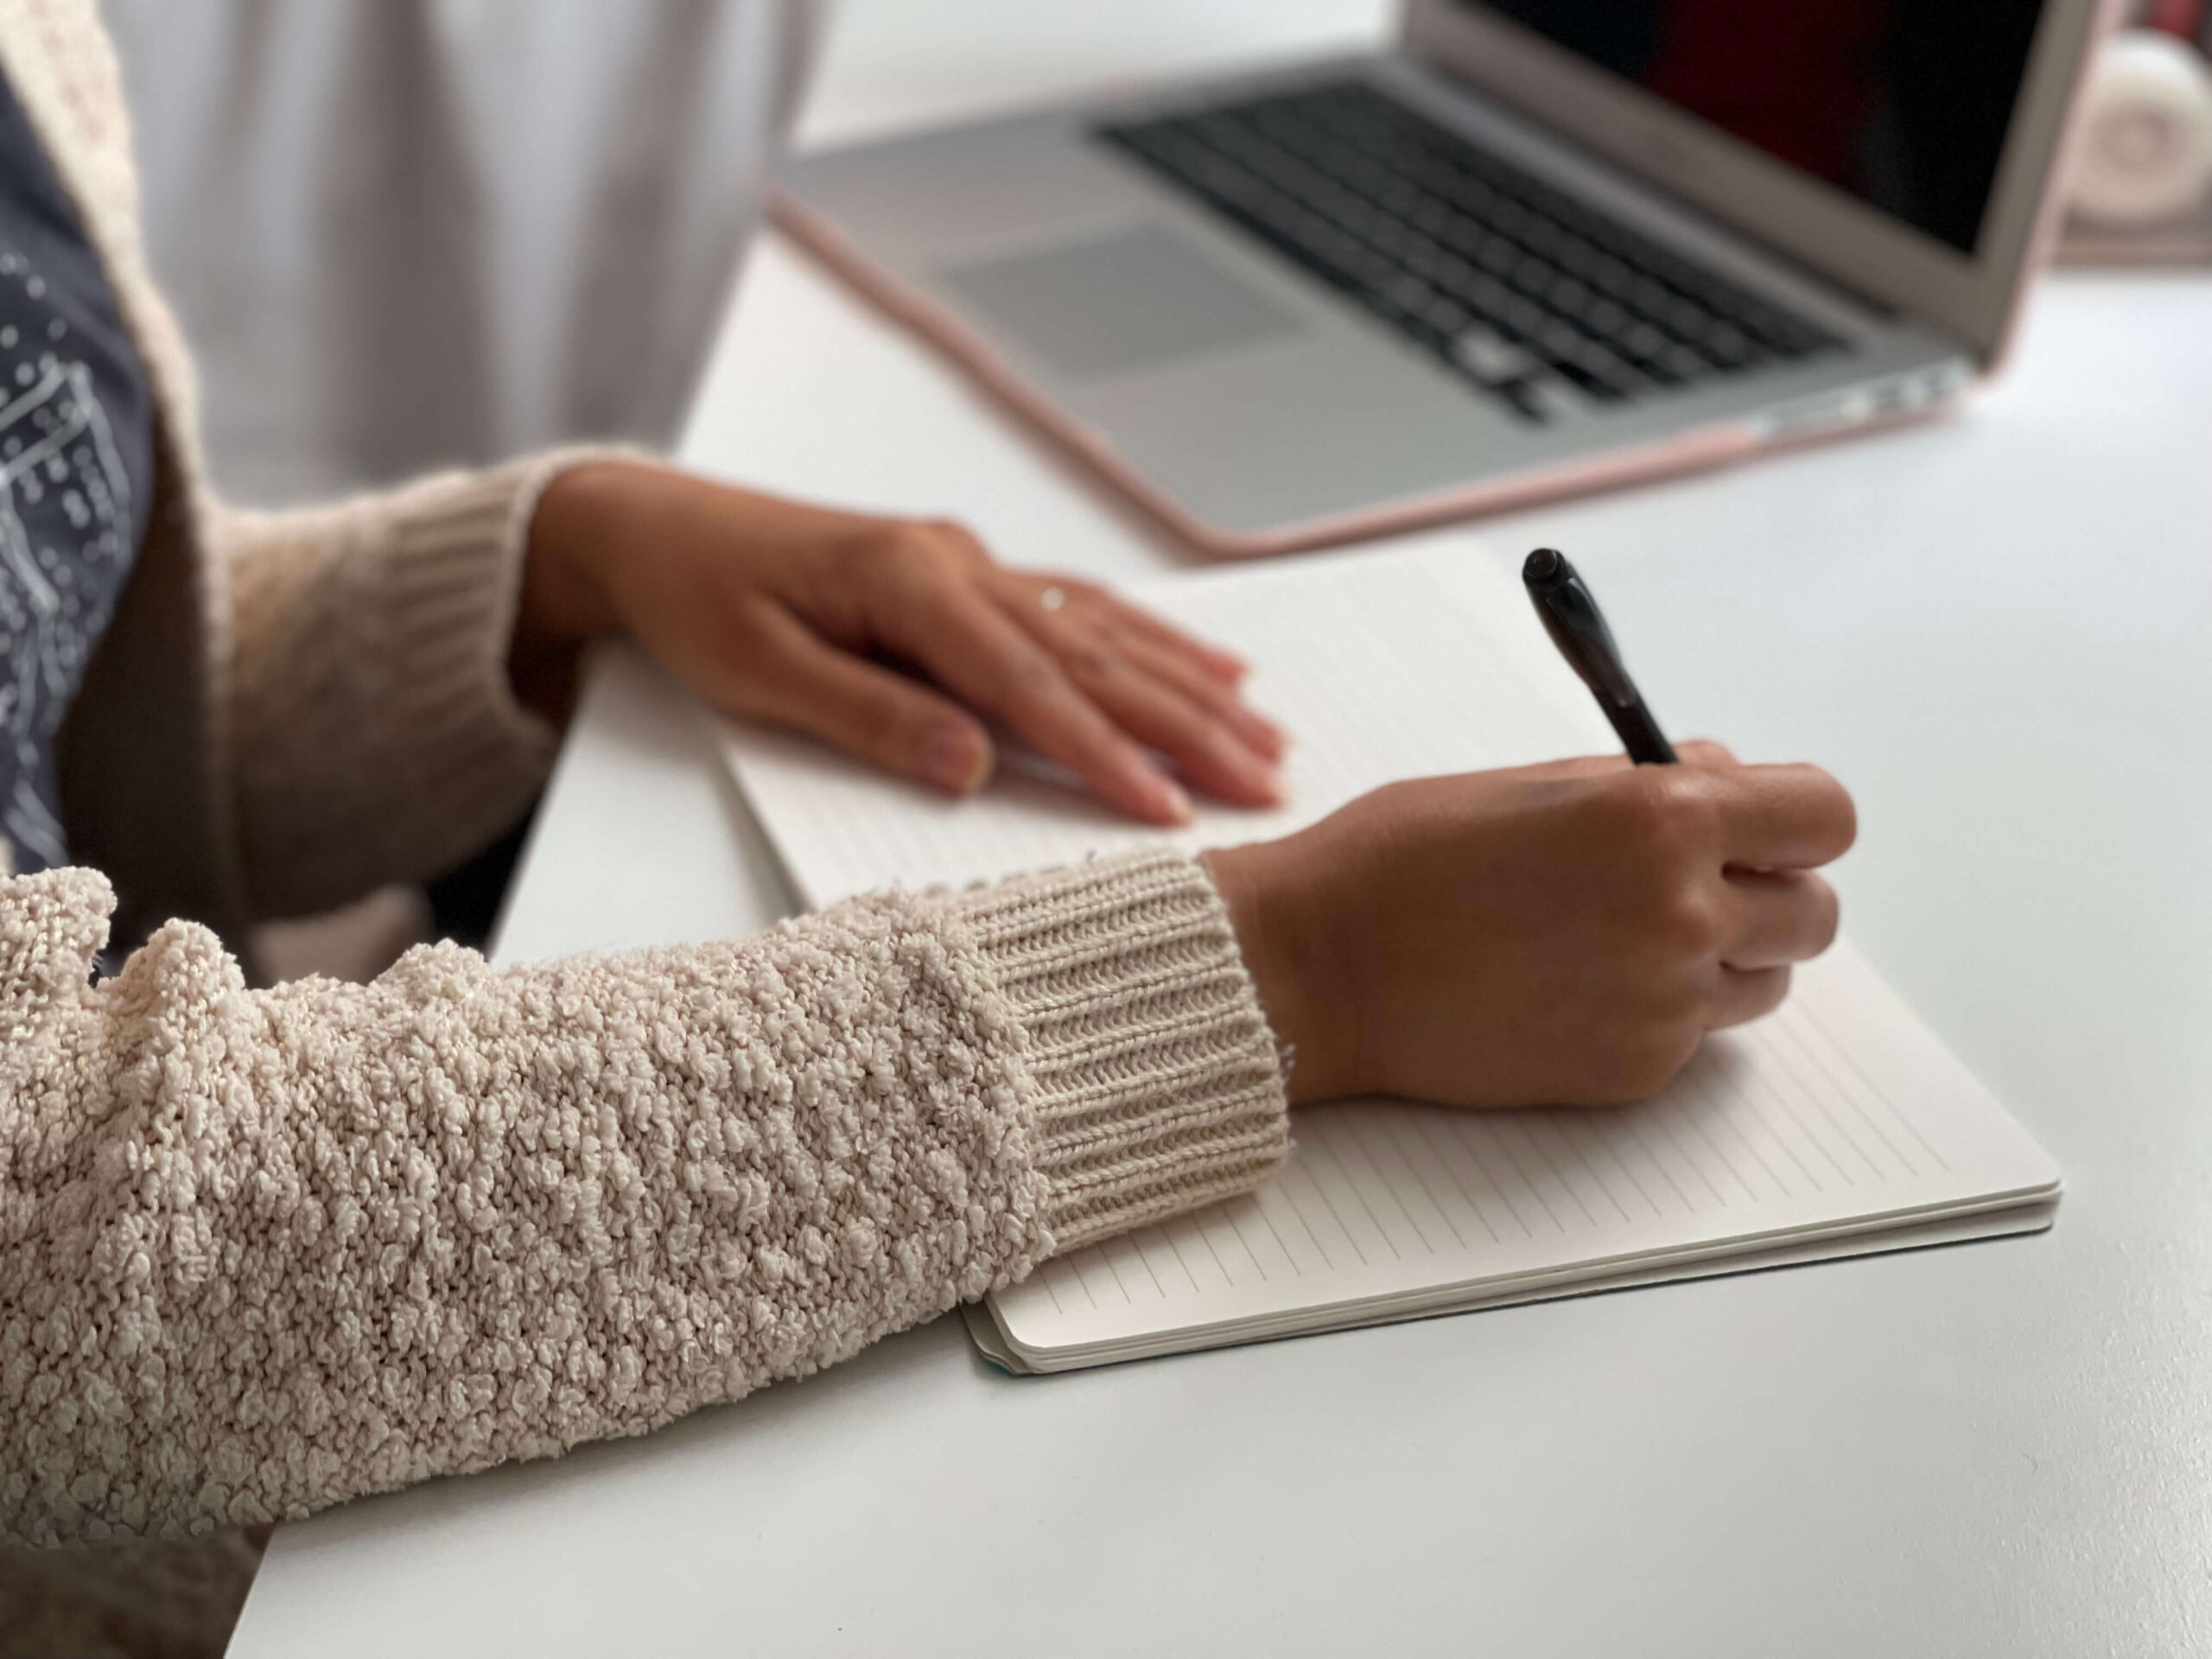 Woman wearing gray shirt and cream cardigan journaling on a white desk.